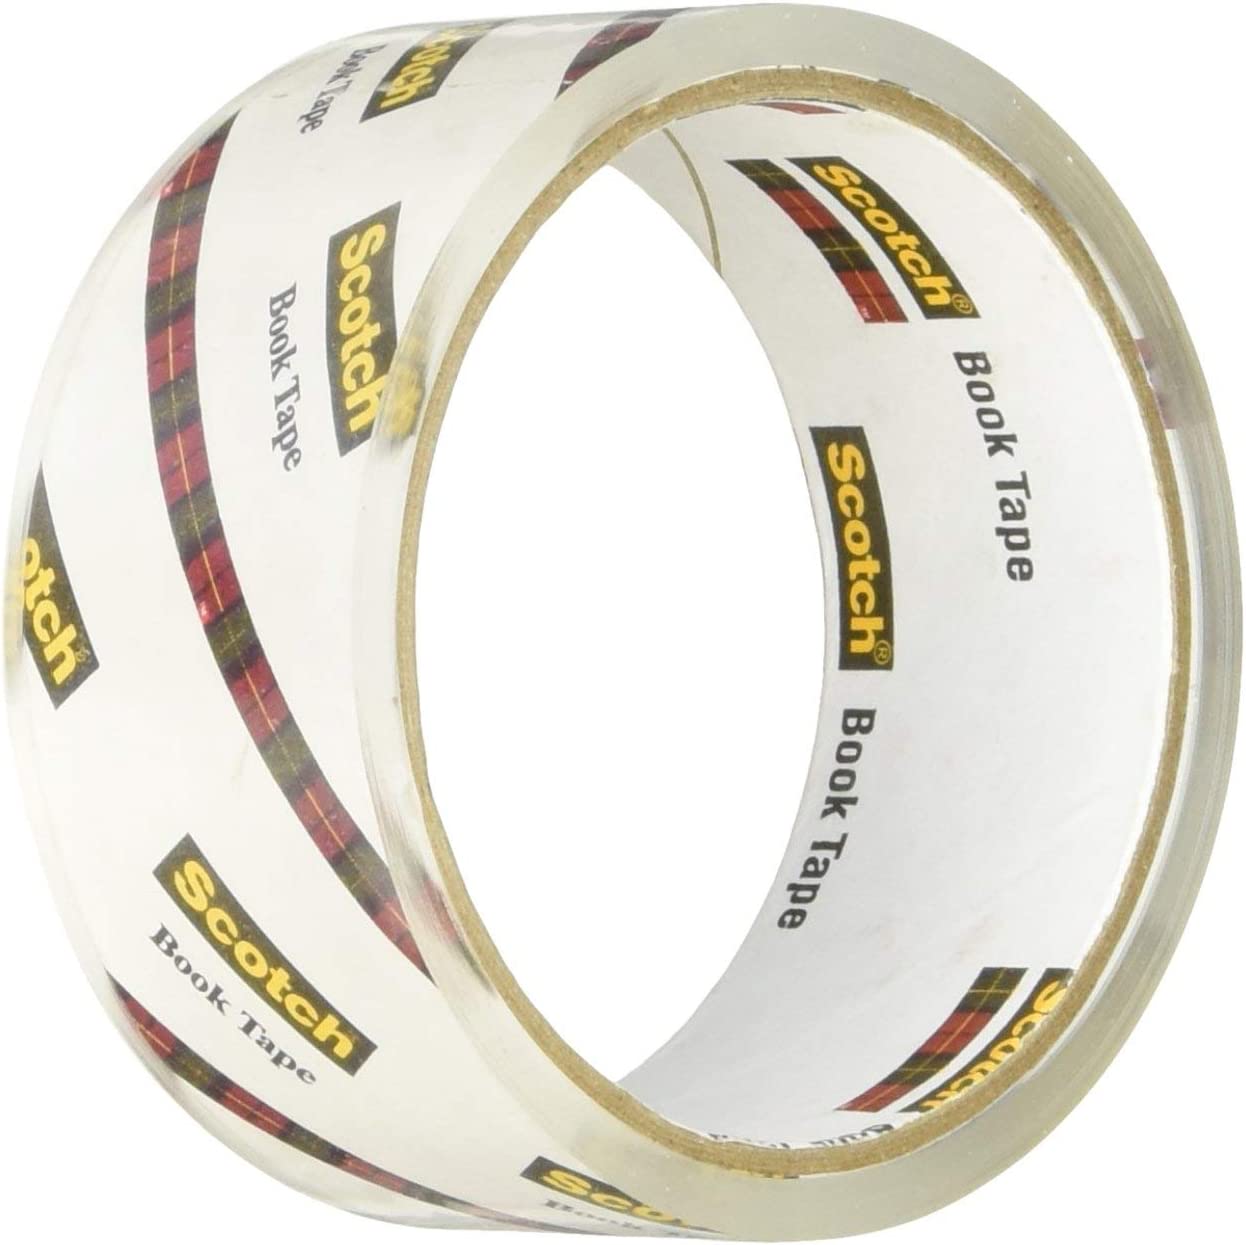 3M Scotch Book Tape 845 Acrylic Single-Sided Adhesive Tape For Repairing  Reinforcing Protecting Binding 2IN